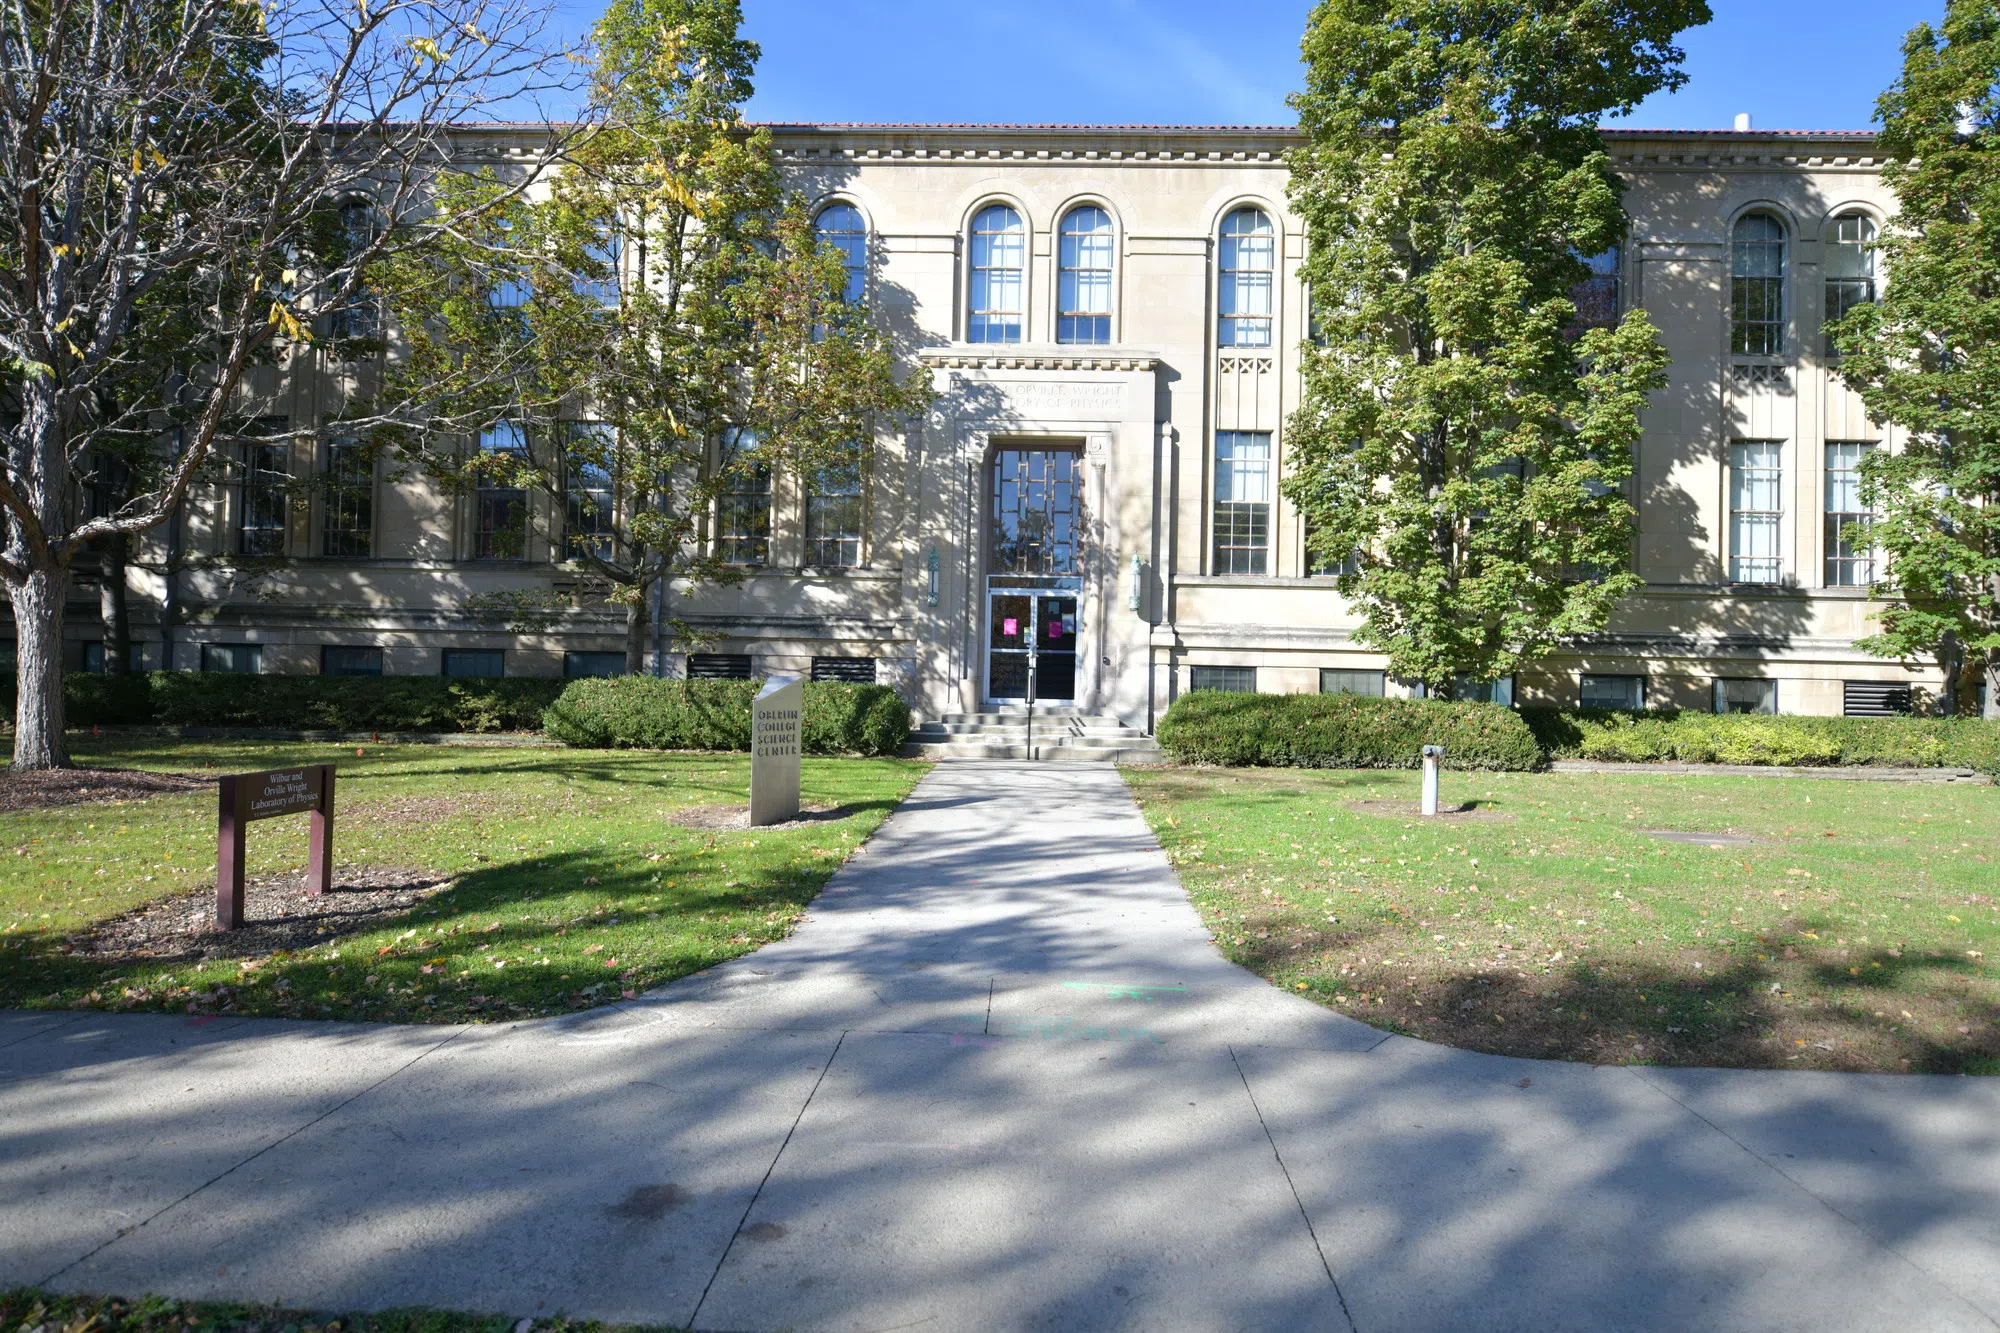 Pictured is a sandstone building from the early 1900s, known as the Wright Physics Lab building. Greenery surrounds the building. 